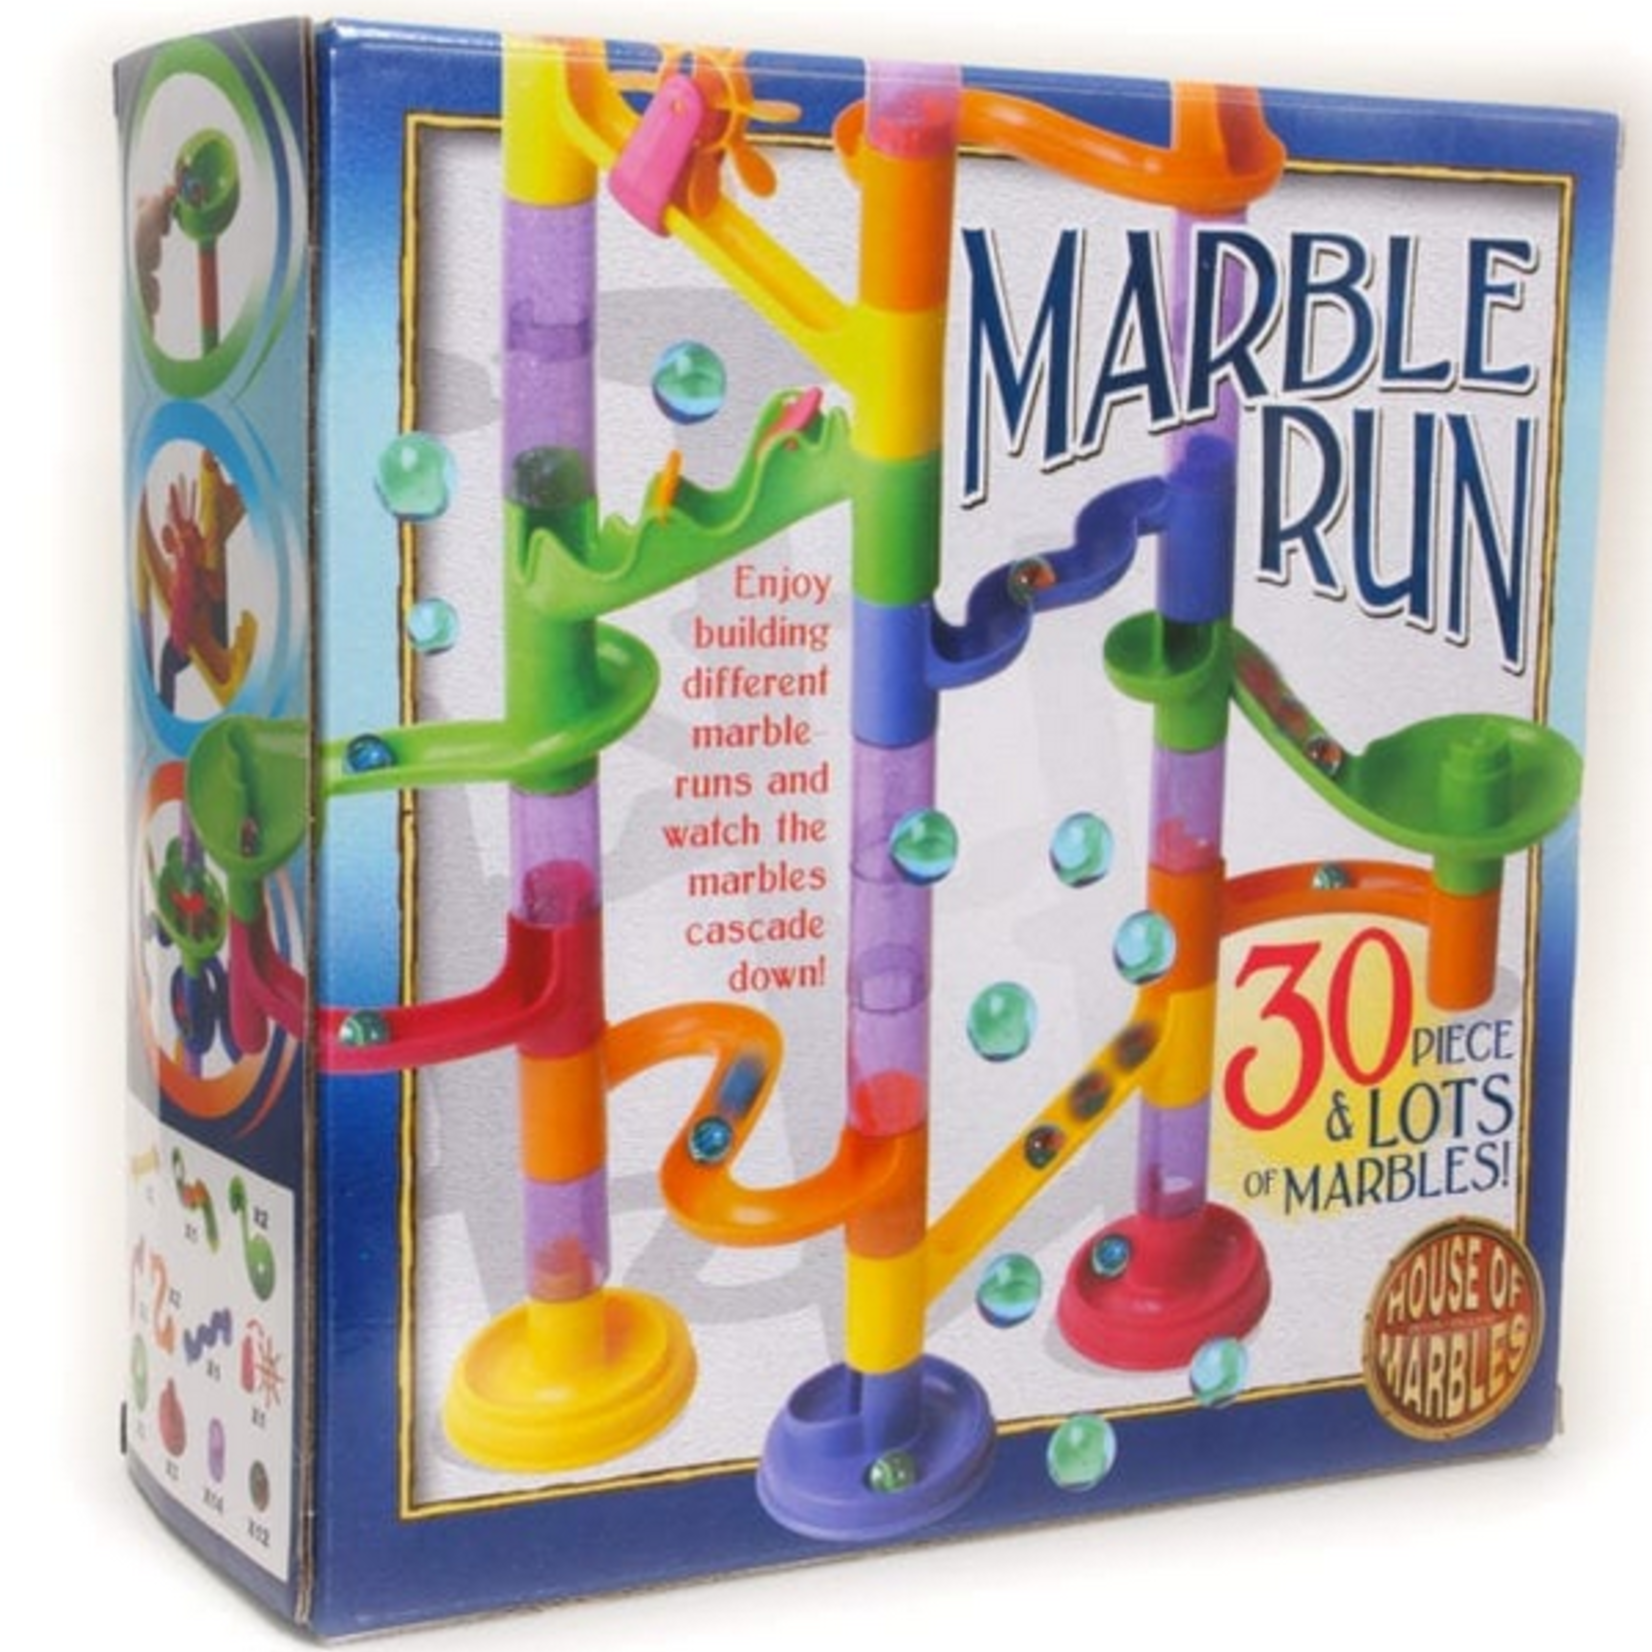 HOUSE OF MARBLES 30 Piece Marble Run